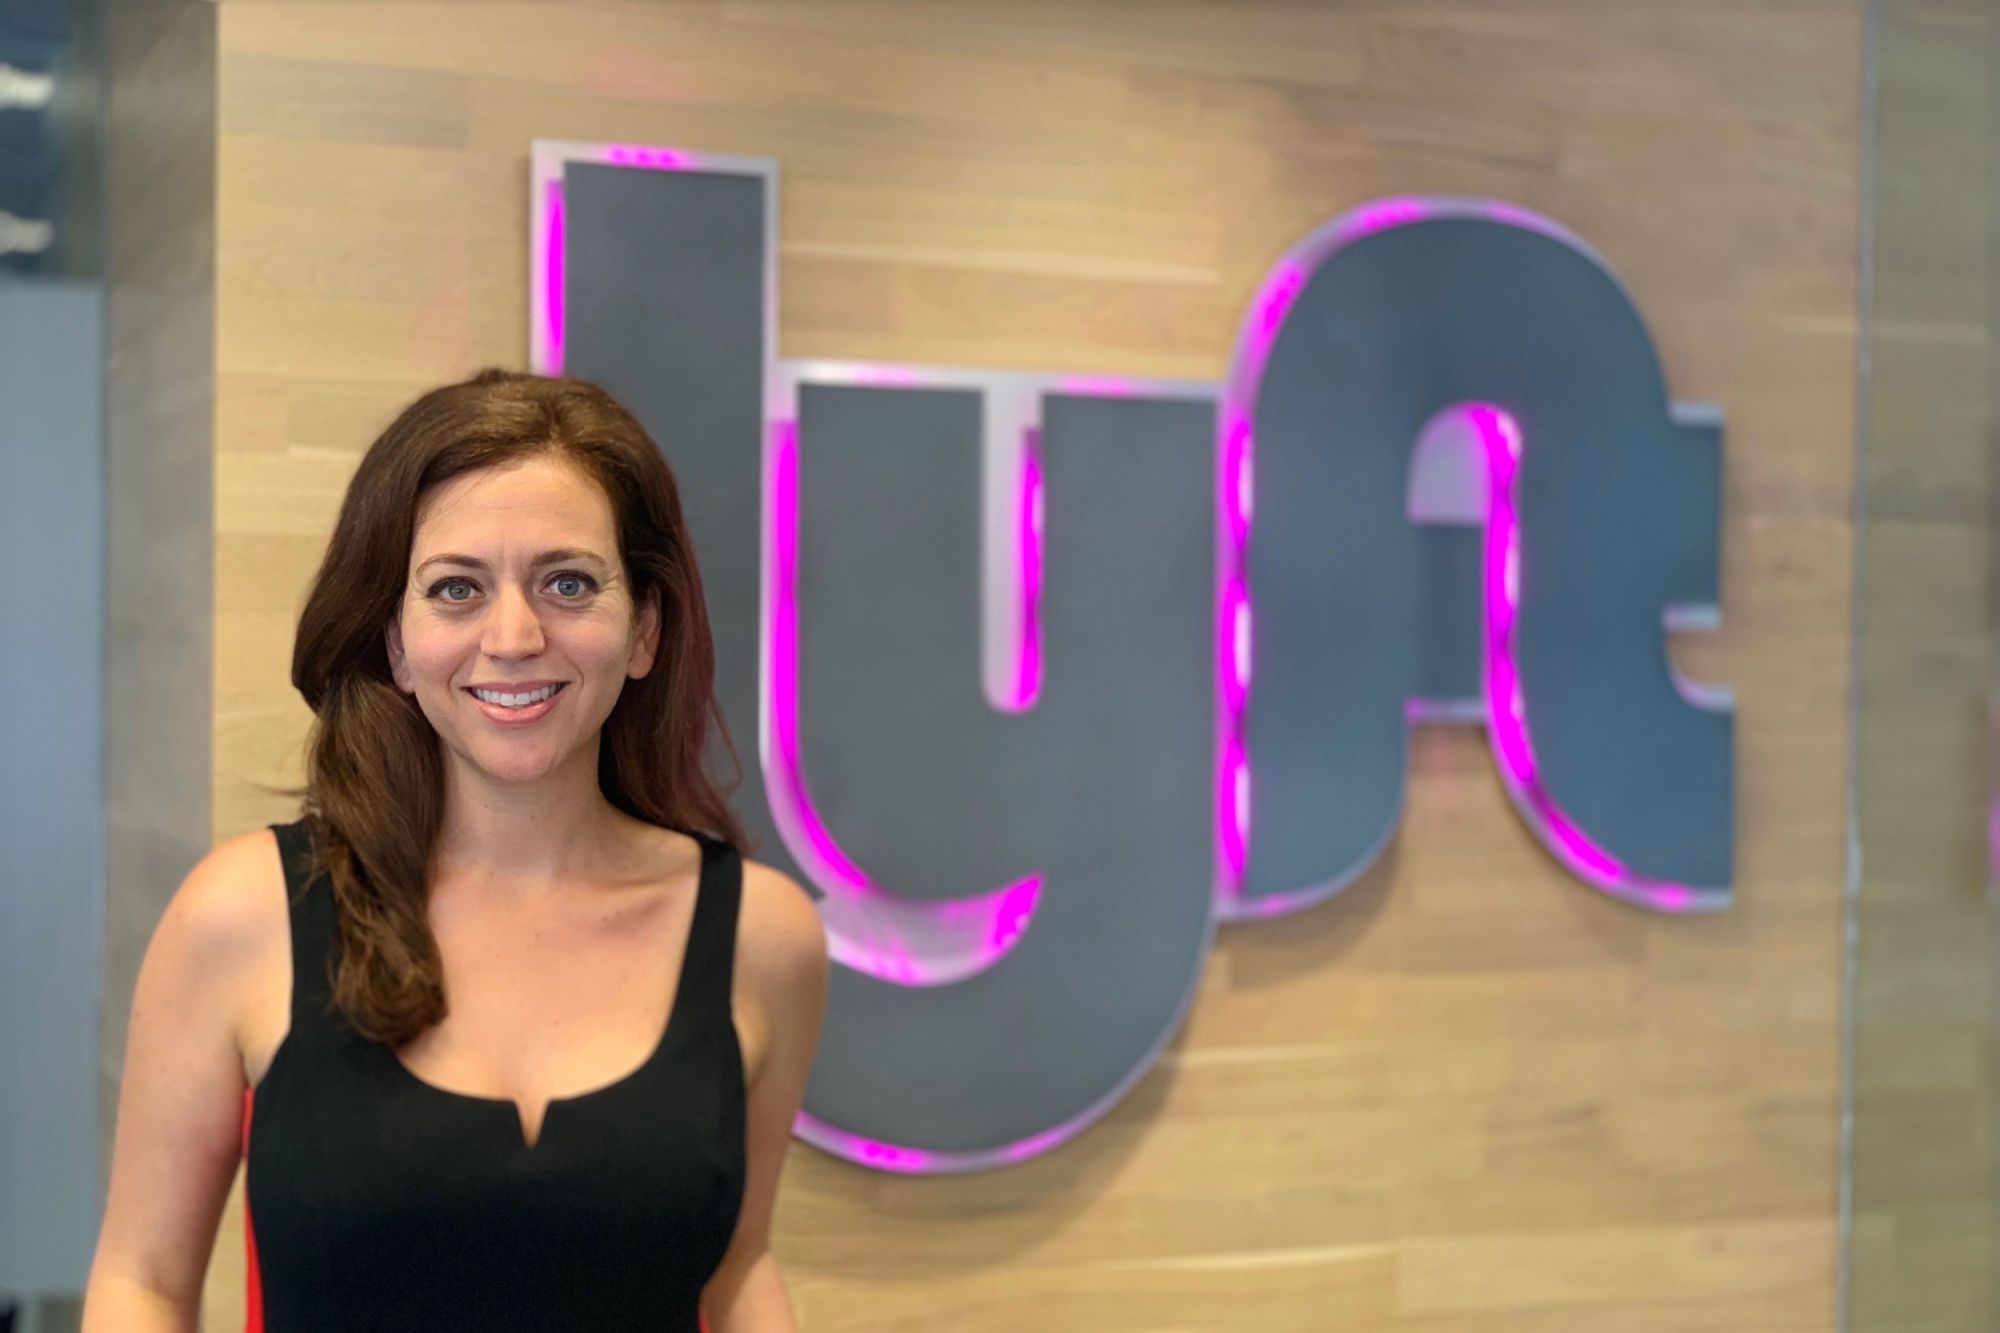 This Lyft Employee's Entrepreneurial Past Inspired Her to Create a Business Pitch Competition for Lyft Drivers